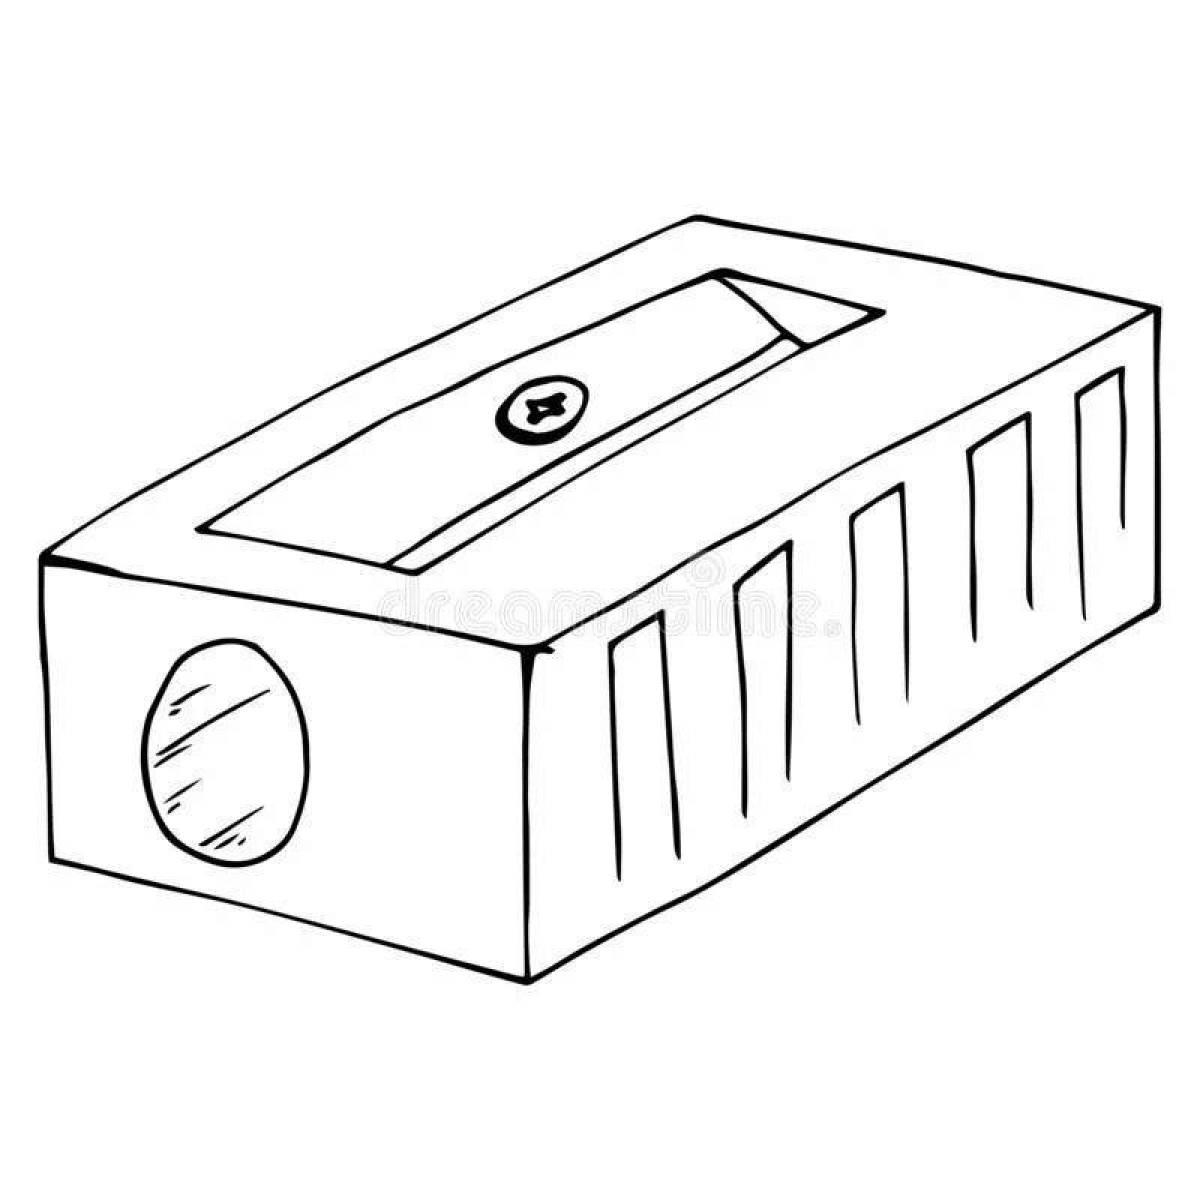 Attractive sharpener coloring page